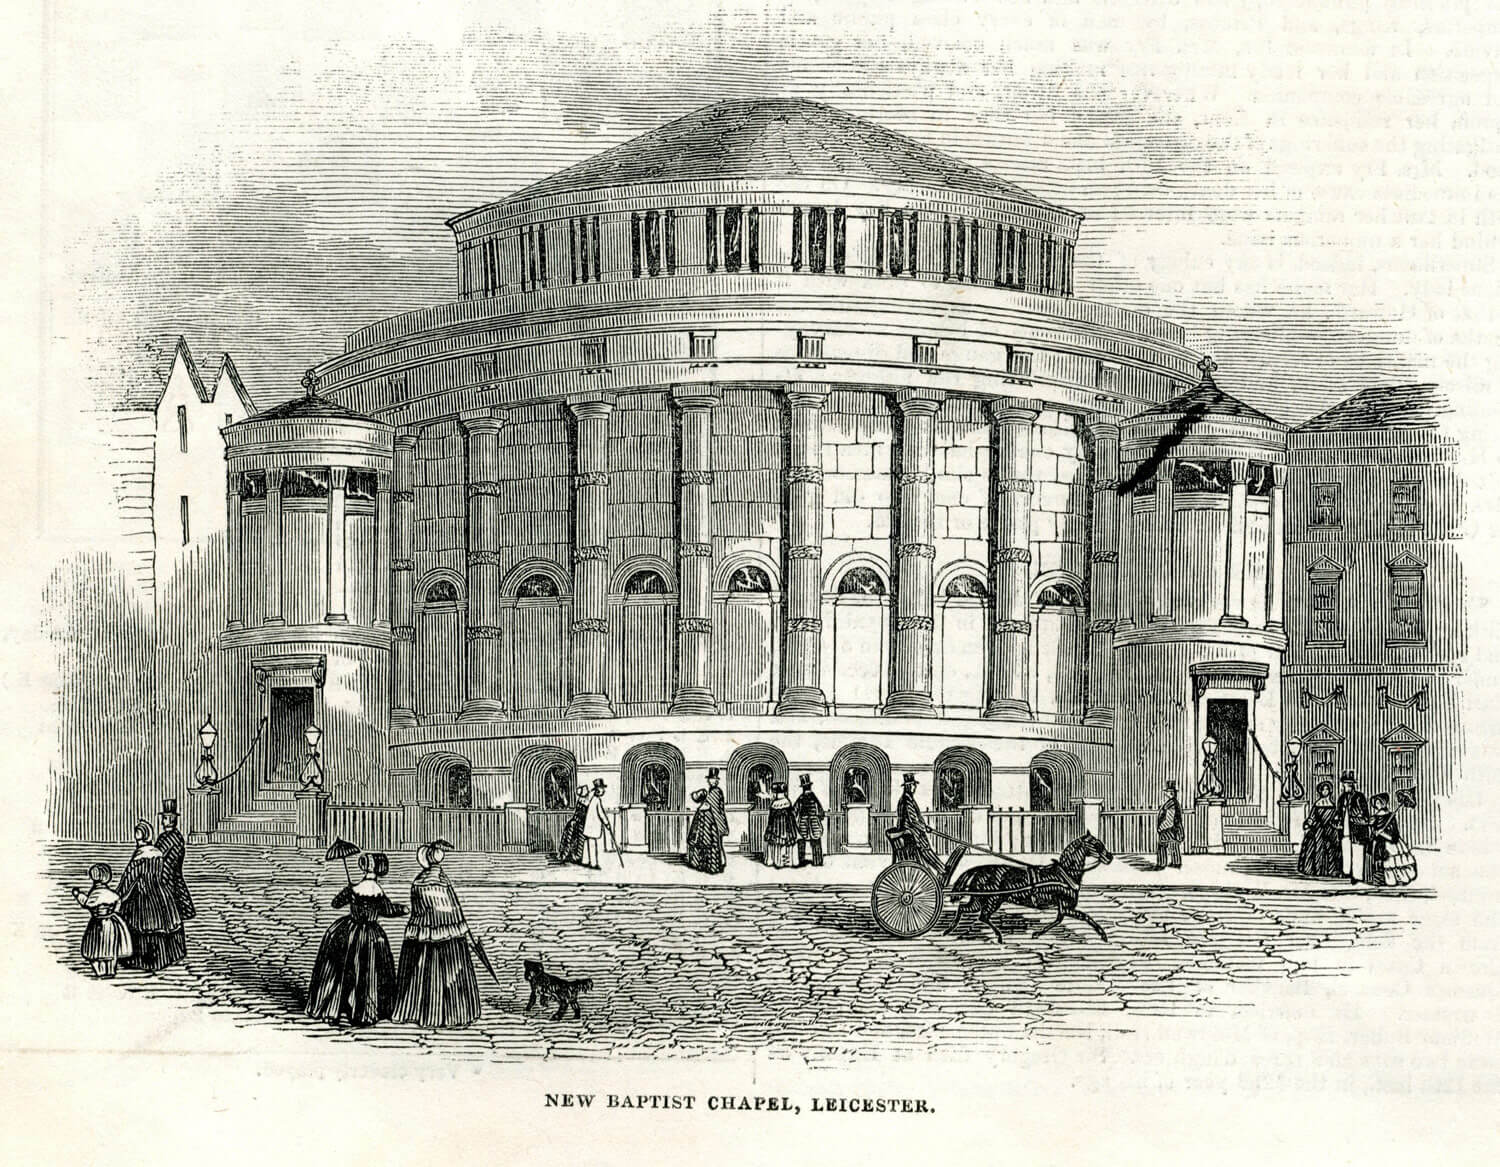 From the London Illustrated Evening News, 1845 - Courtesy of the Special Collections of the University of Leicester